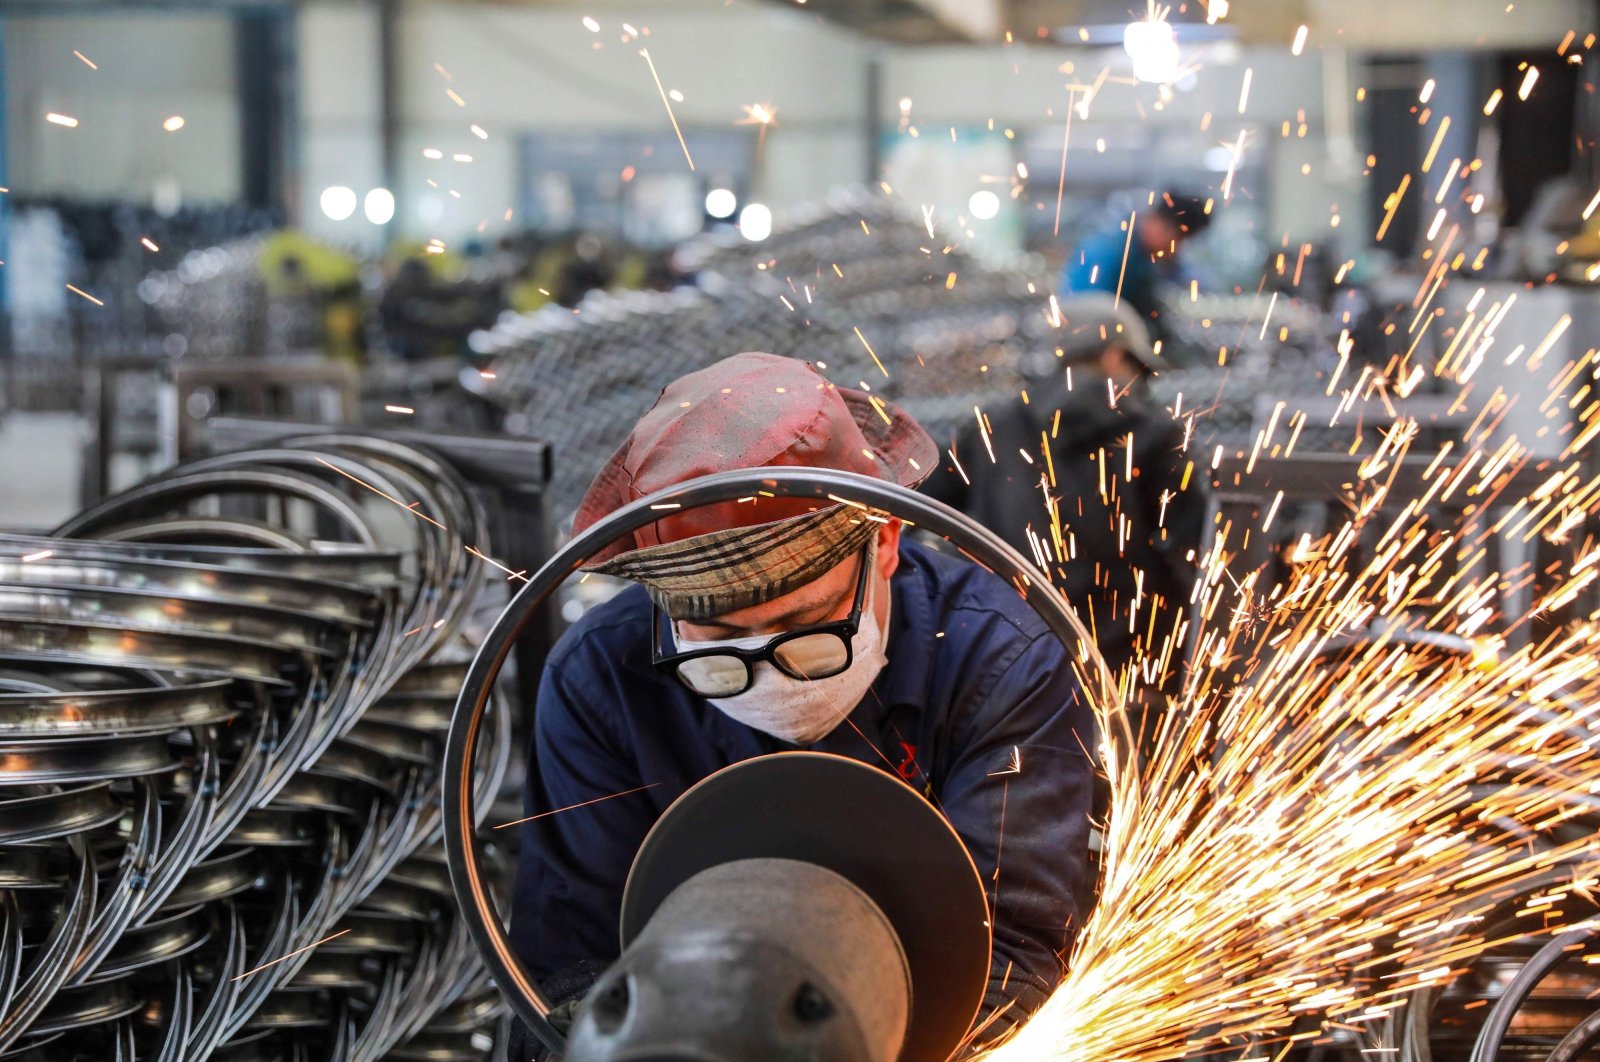 A worker welds wheels at a factory in Hangzhou, in eastern Zhejiang province, China, April 16, 2021. (AFP Photo)